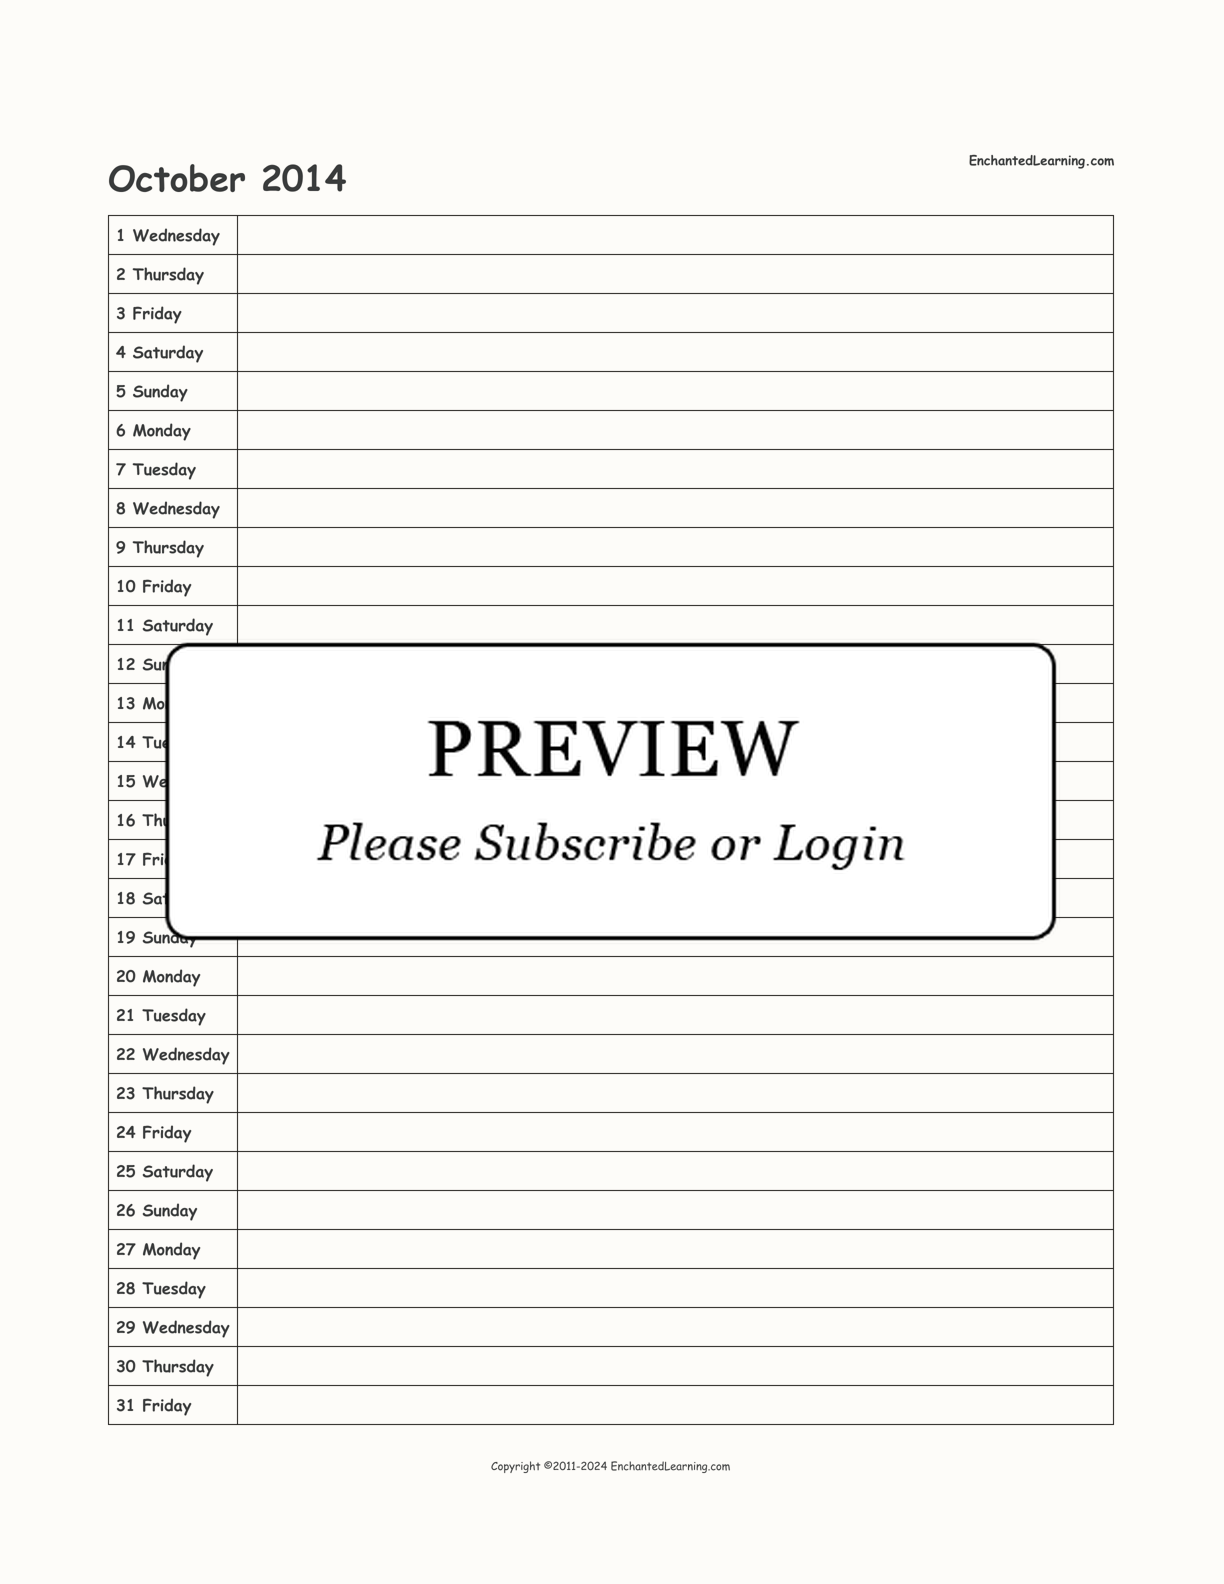 2014 Scheduling Calendar interactive printout page 10